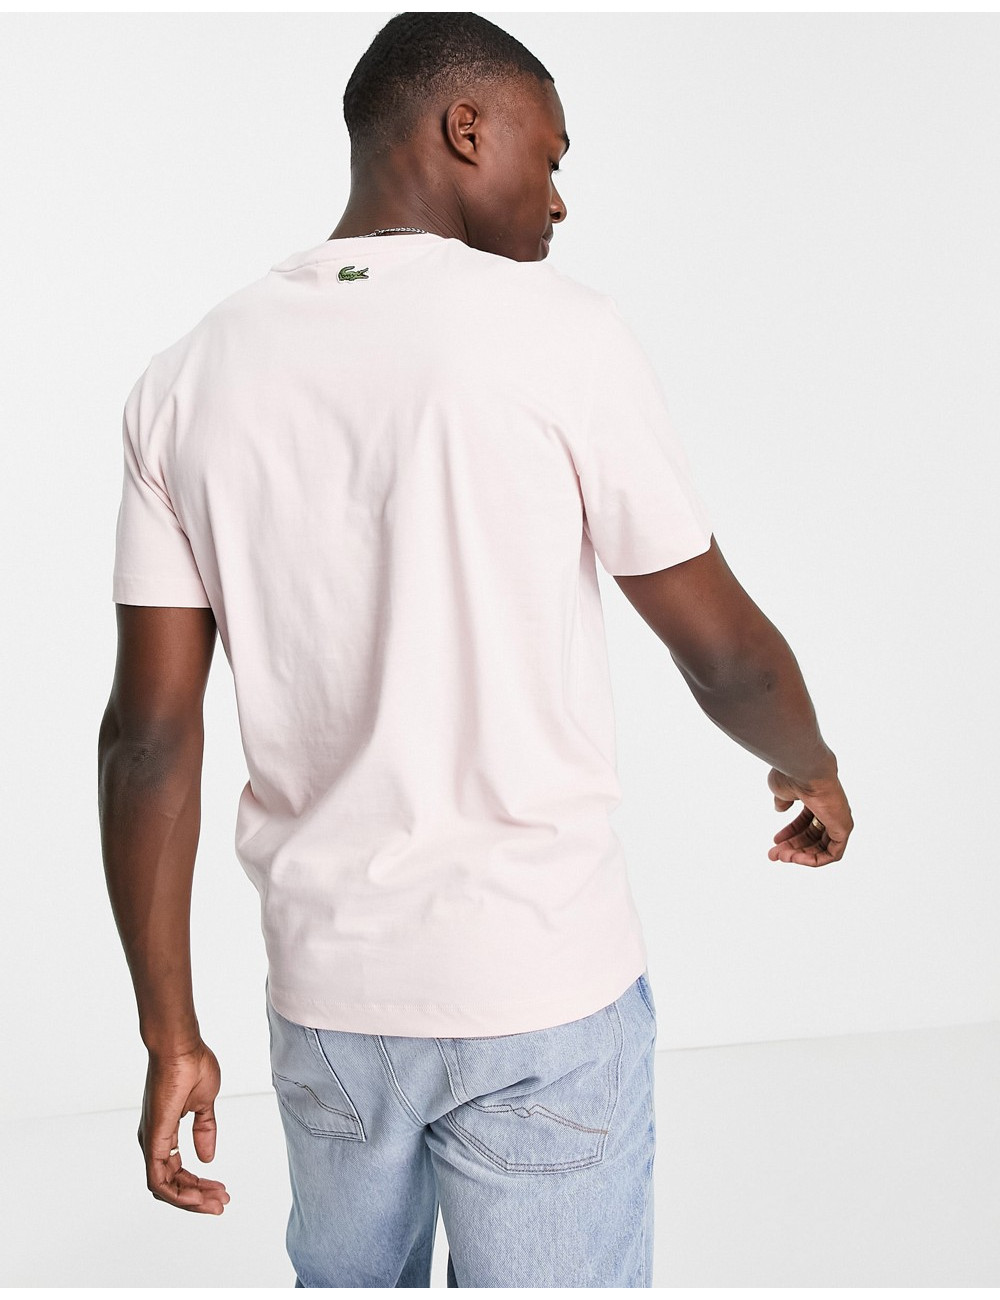 Lacoste stamp logo t-shirt...